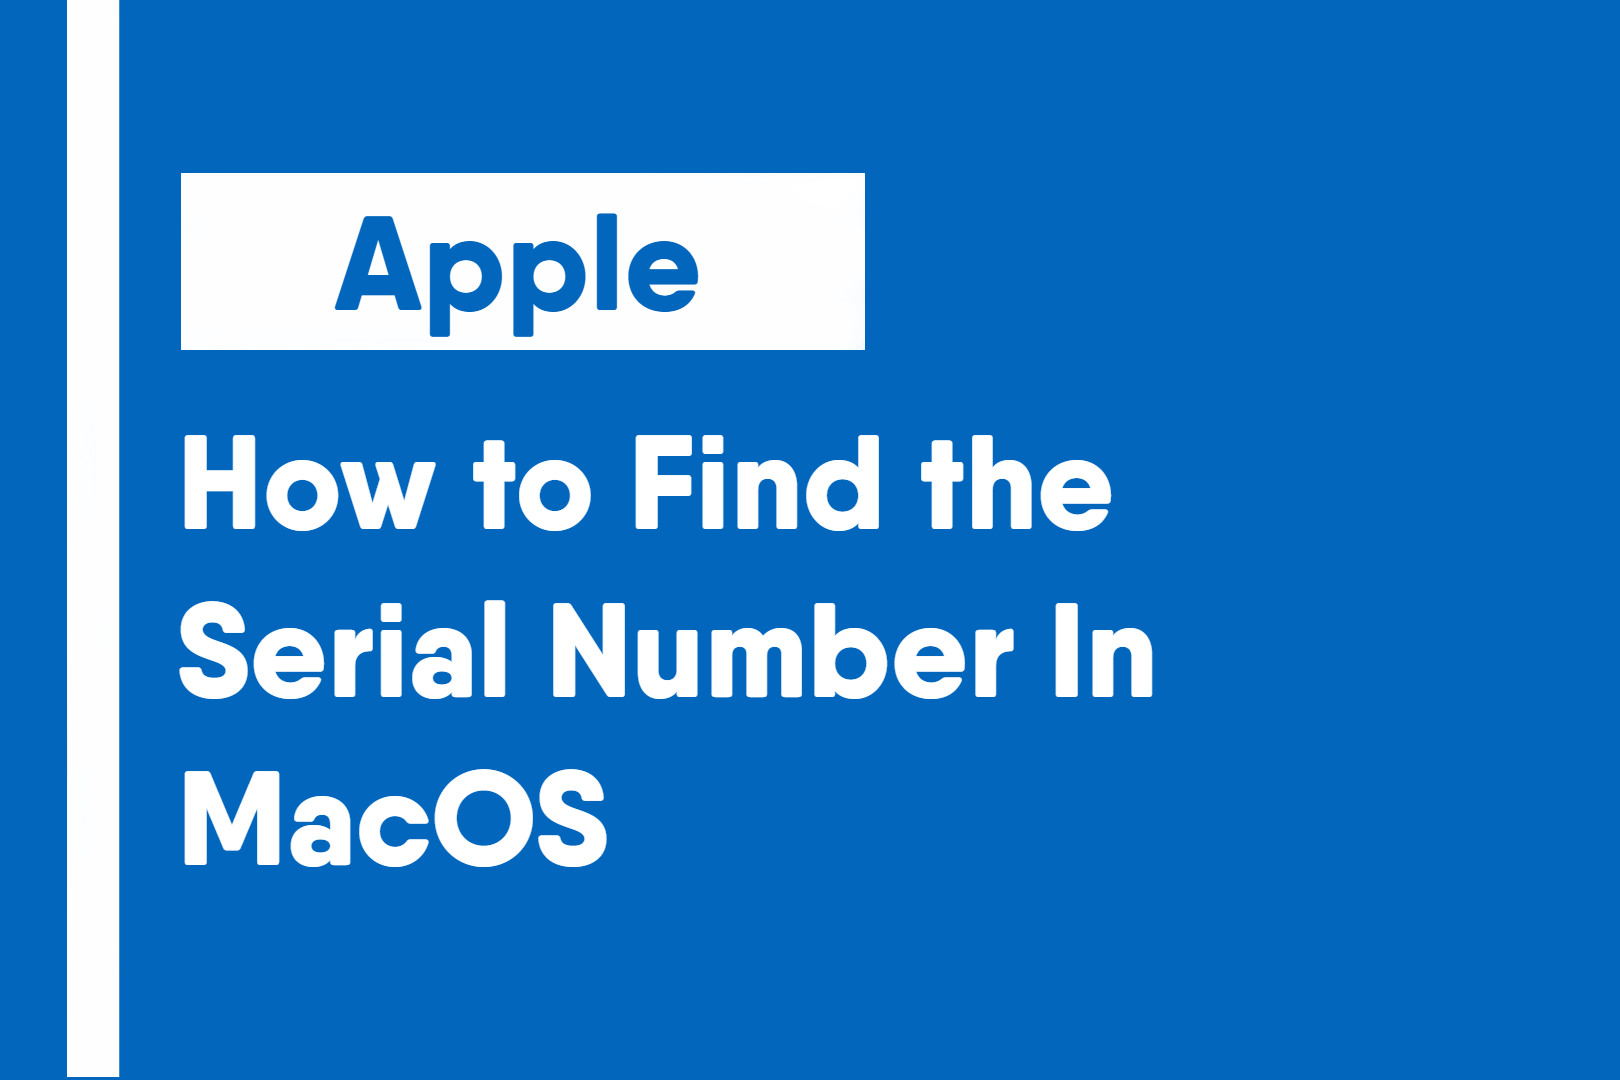 How to Find the Serial Number In MacOS